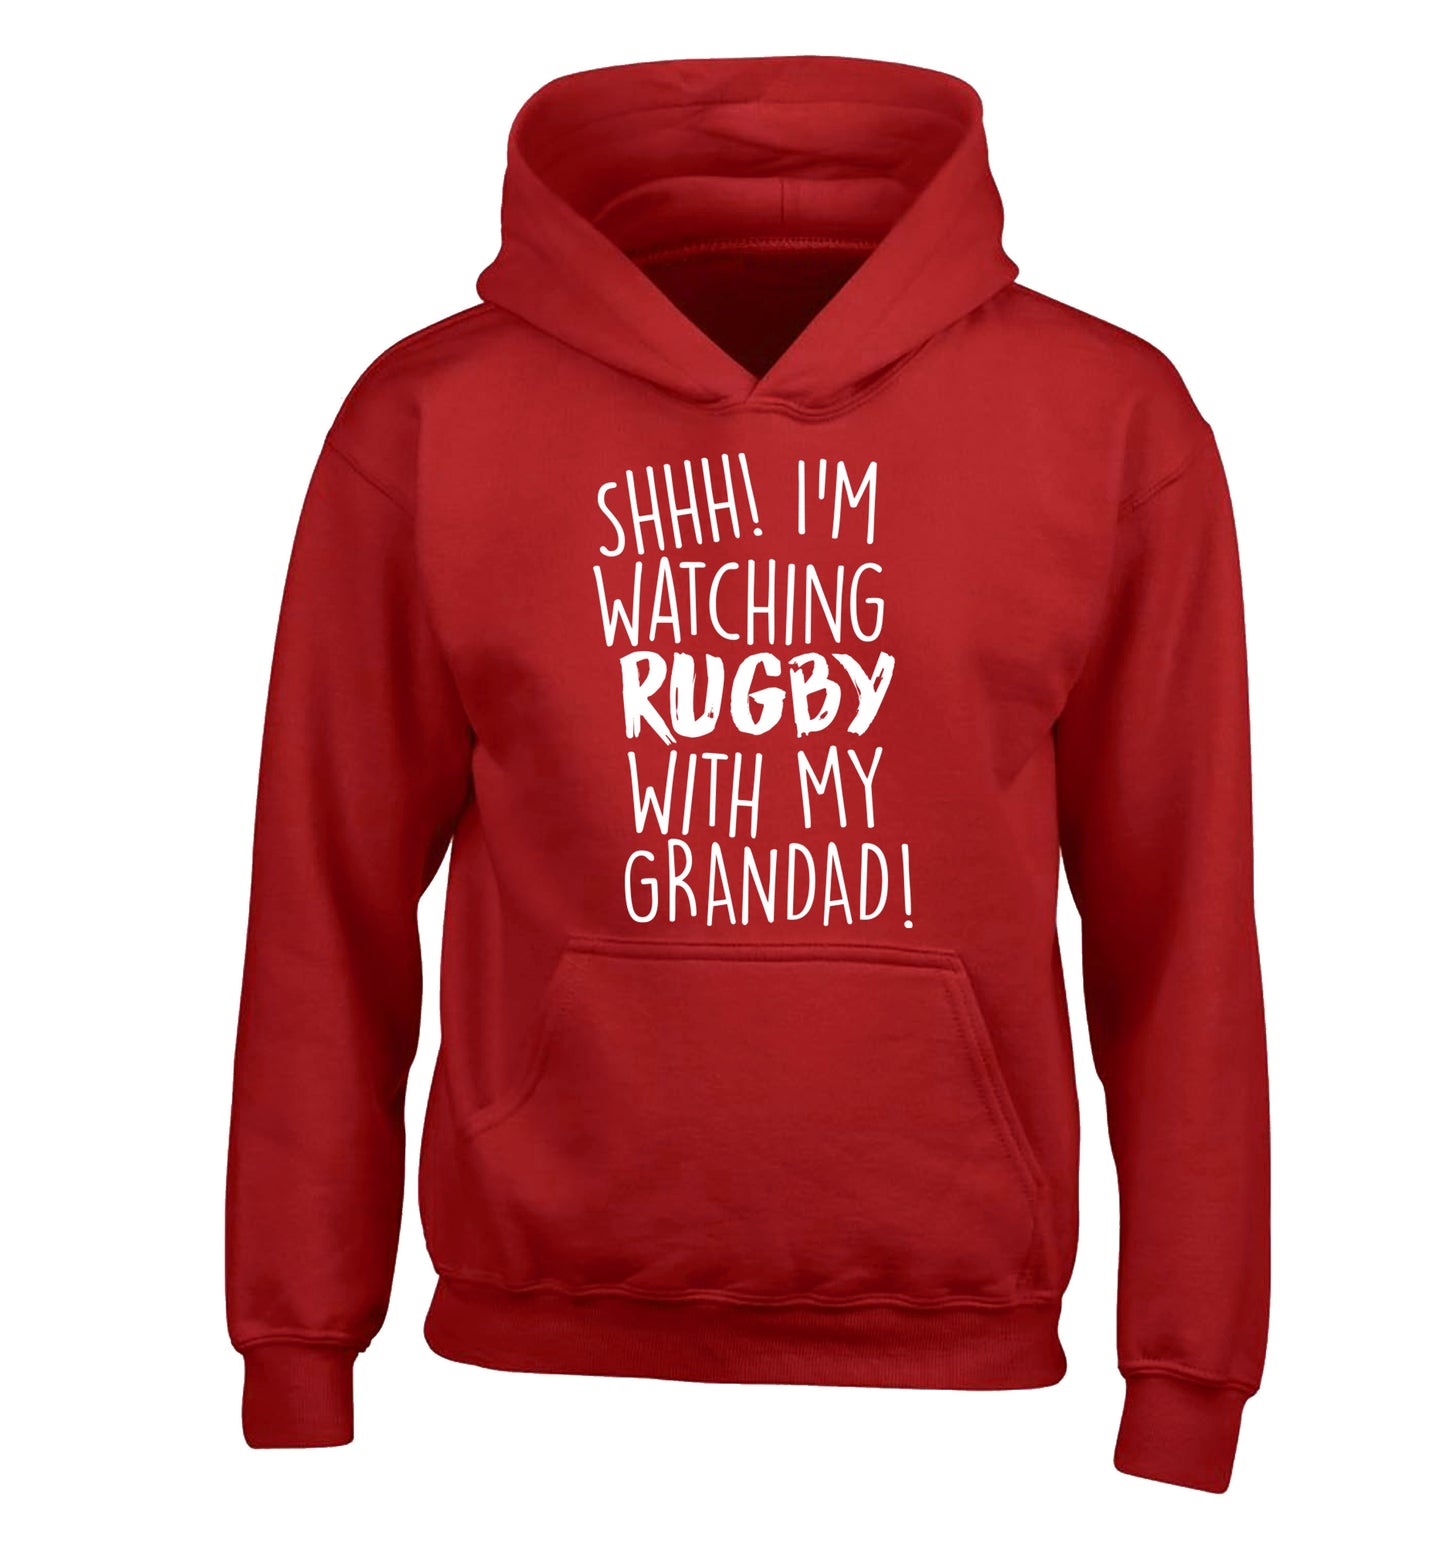 Shh I'm watching rugby with my grandaughter children's red hoodie 12-13 Years